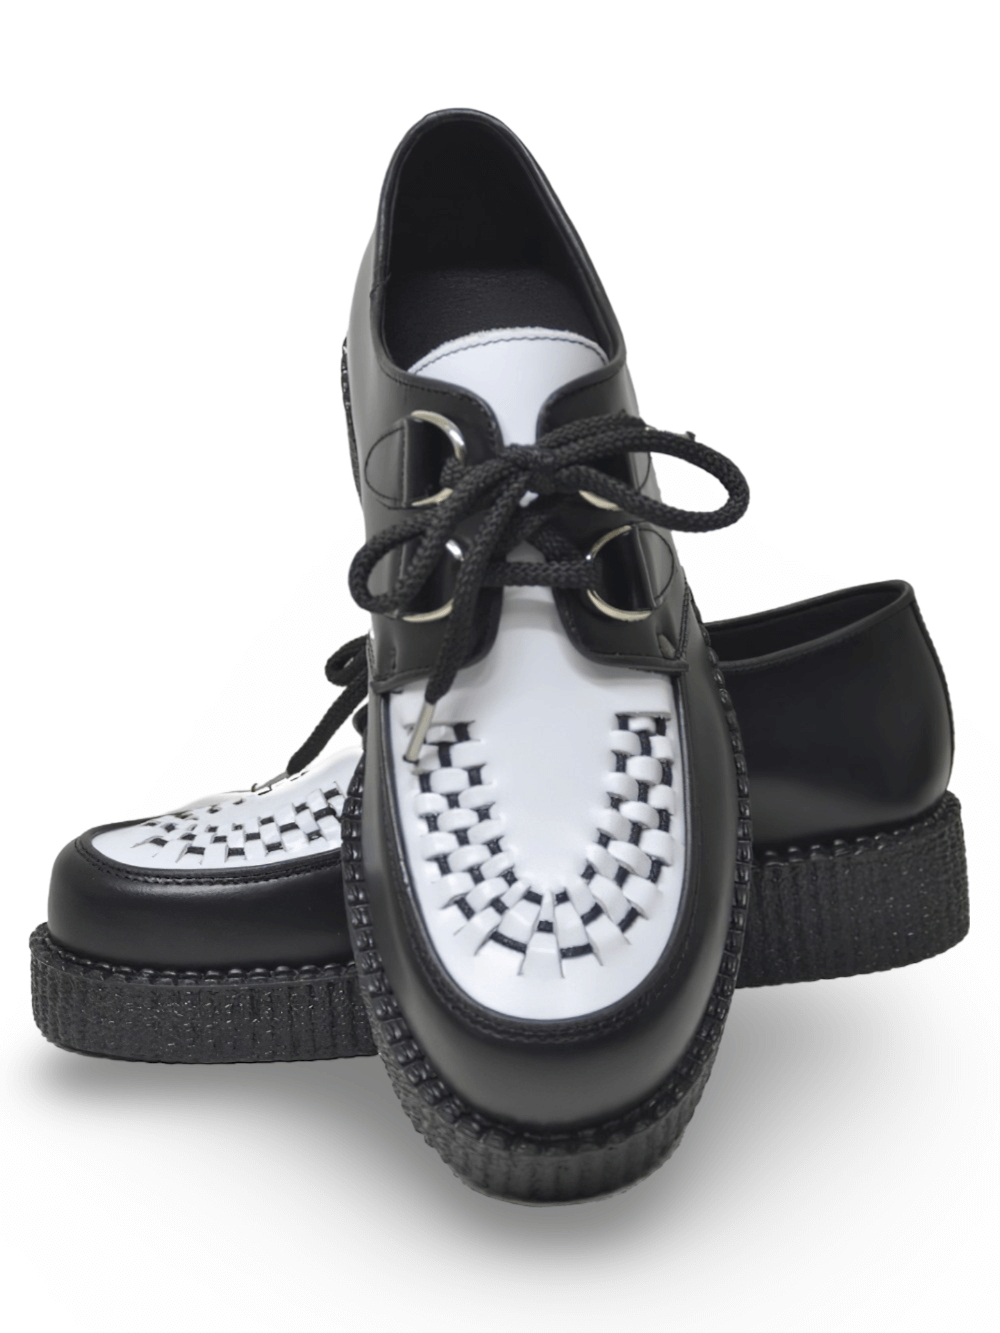 Chic Black and White Creepers with Rubber Sole